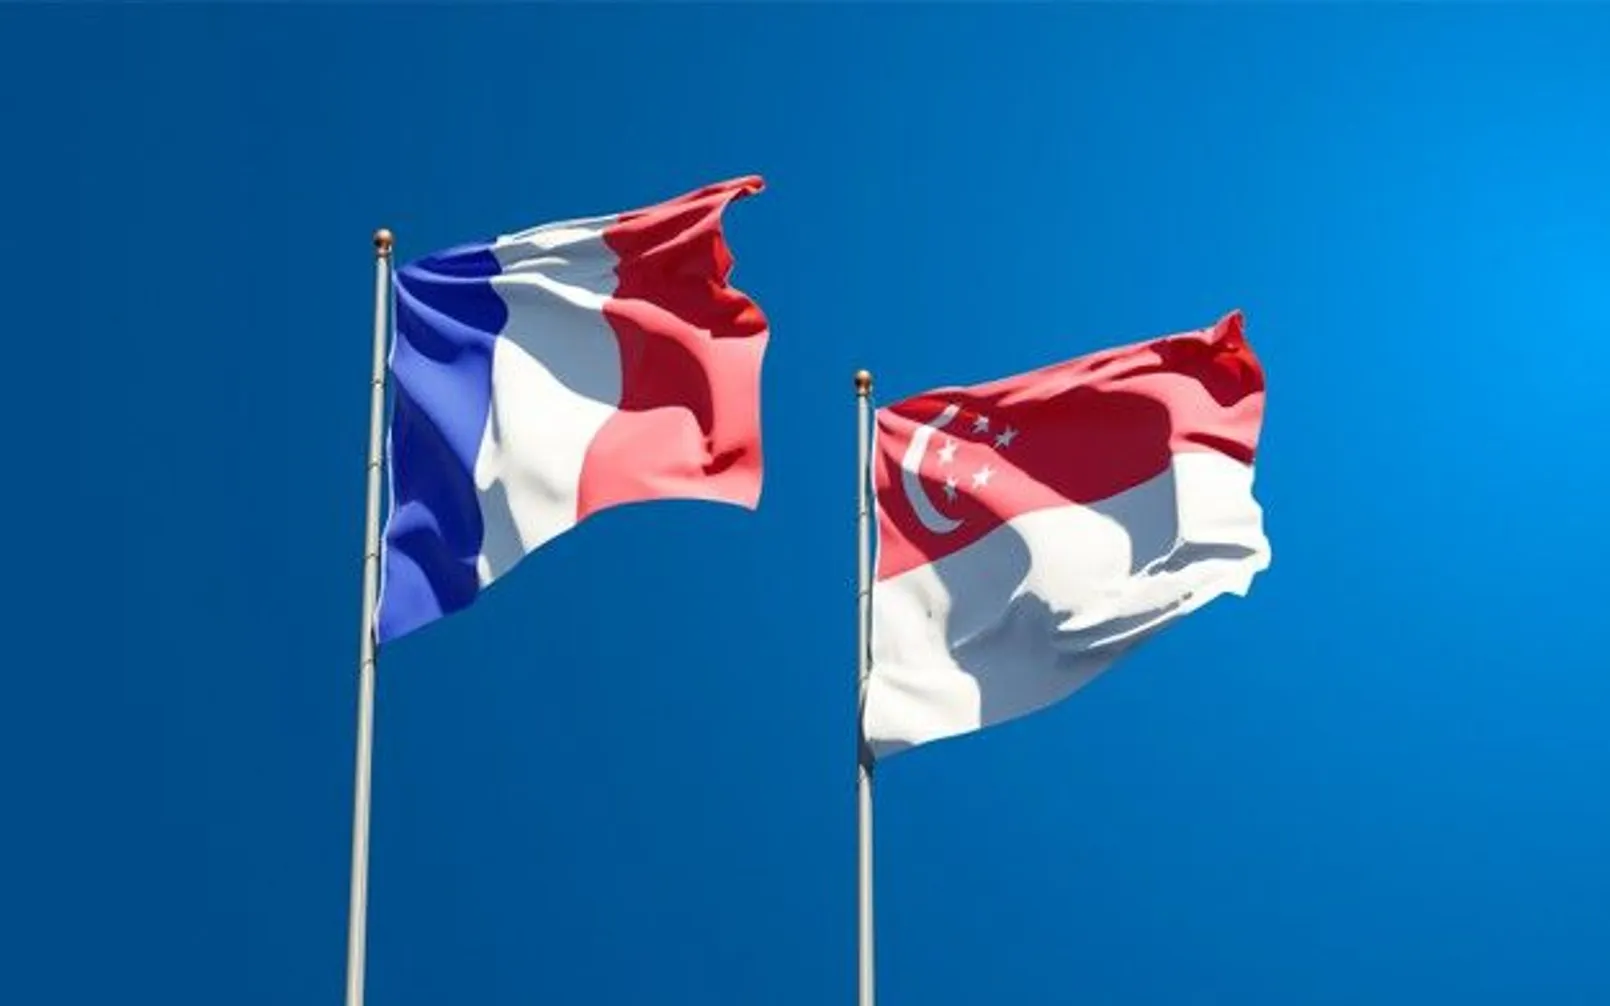 Beautiful National State Flags France Singapore Together 337817 1537.jpeg.jpg